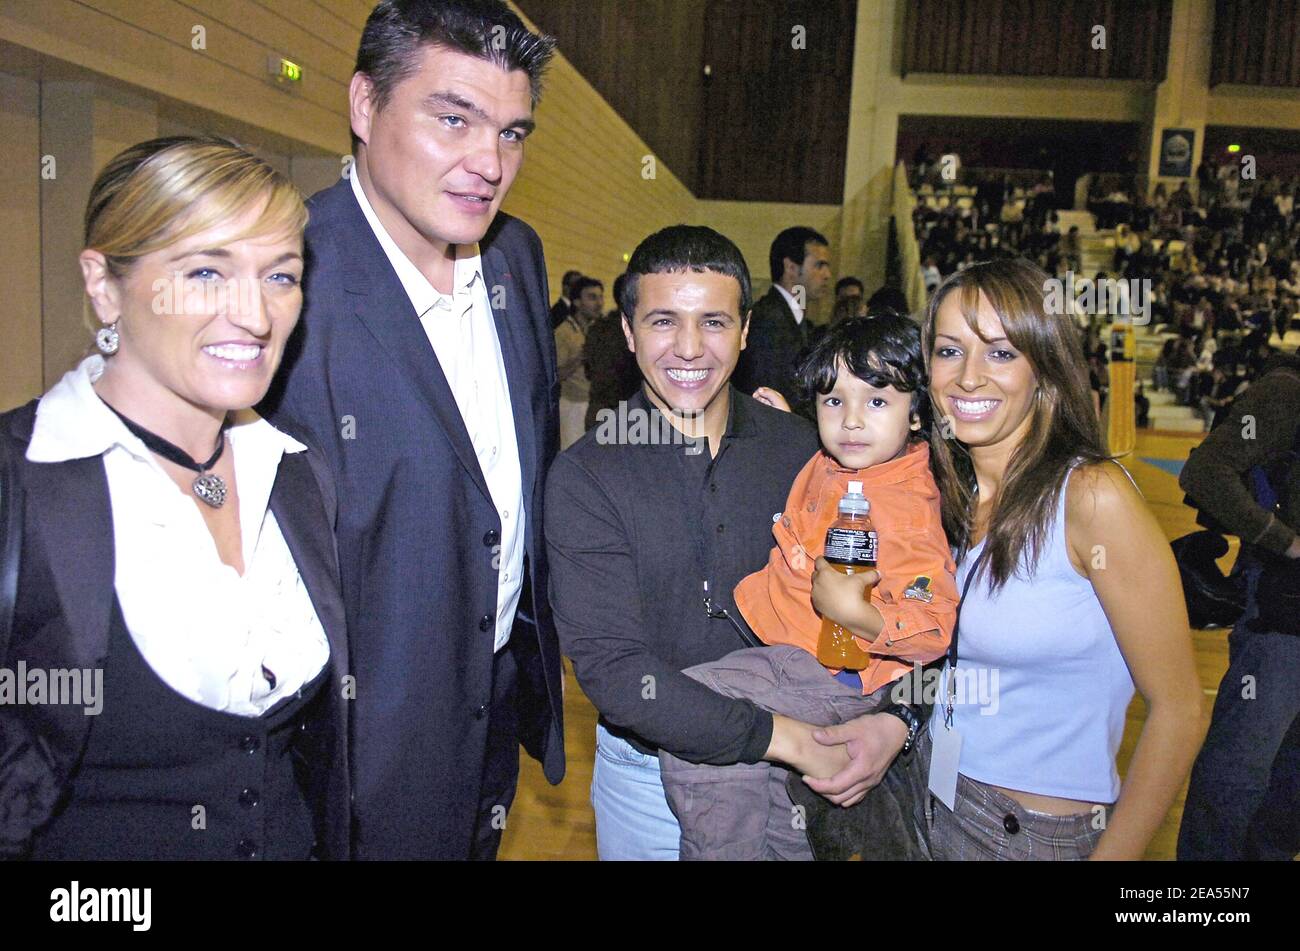 French former olympic champion judoka David Douillet and his wife Valerie pose with French singer Faudel with his wife Anissa and his son Anzy at French basket player Tony Parker of San Antonio Spurs and Powerade show in Issy-les-Moulineaux, near Paris, in France, on September 27, 2005. Photo by Nicolas Gouhier /CAMELEON/ABACAPRESS.COM Stock Photo